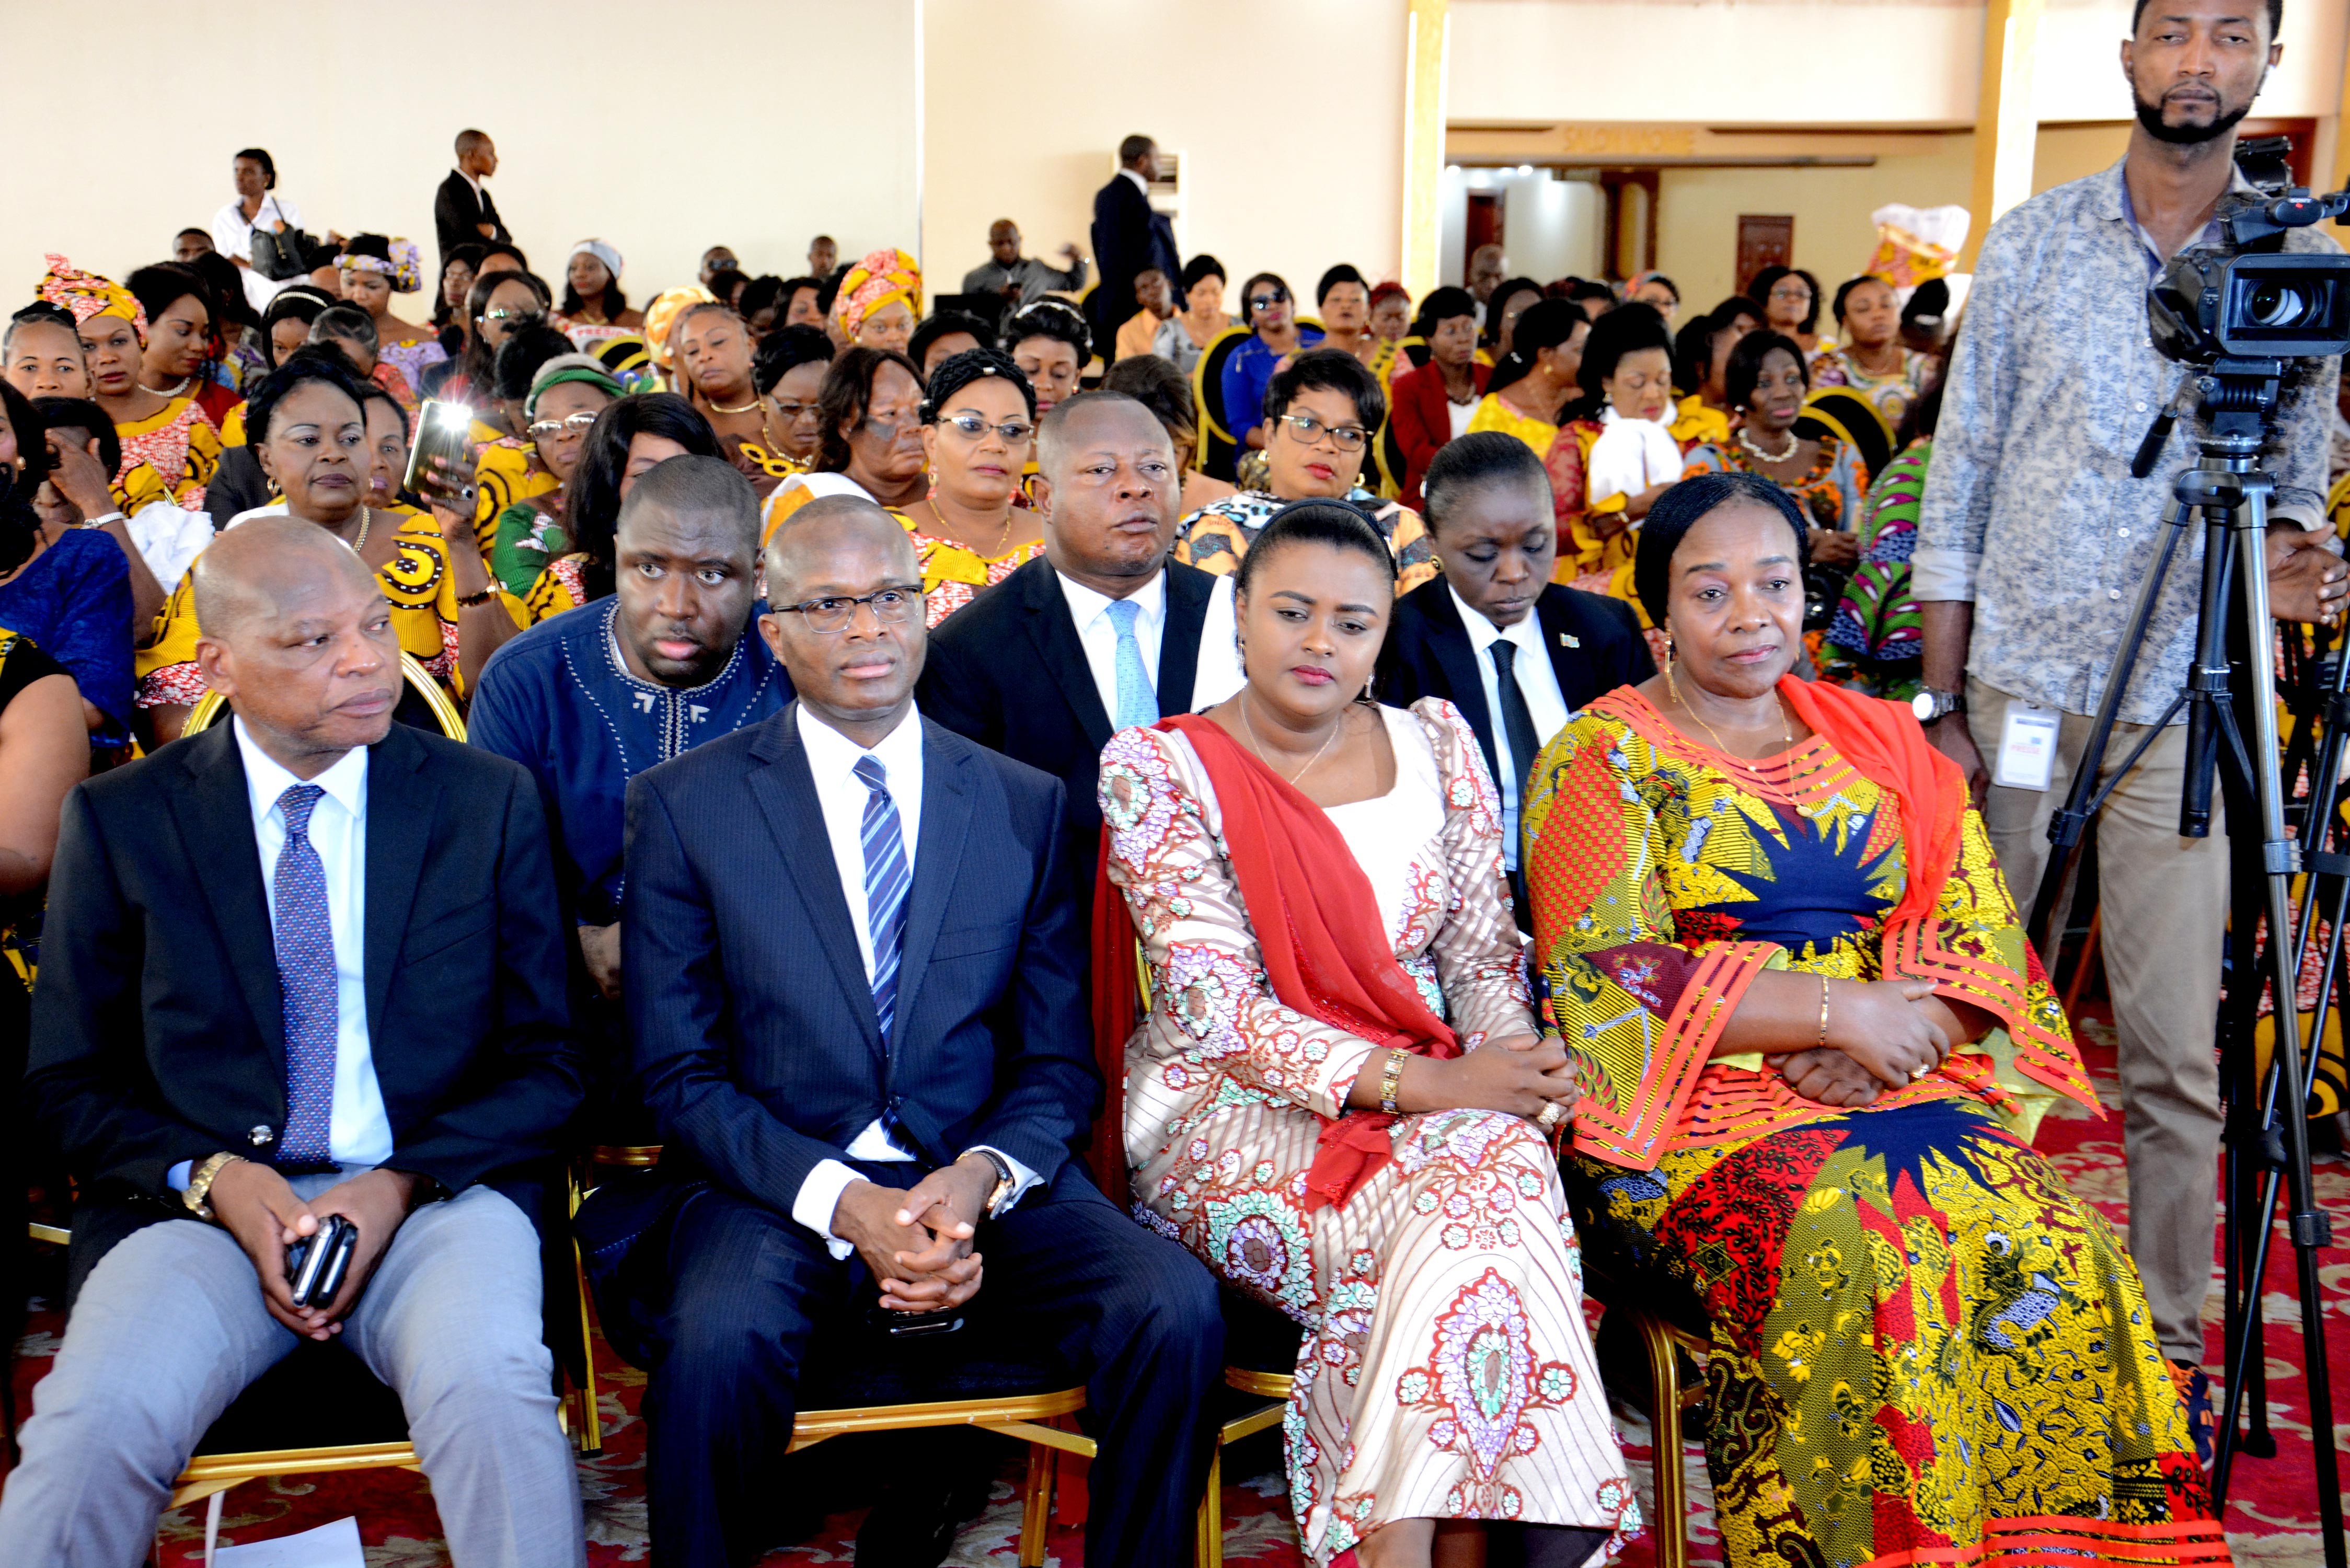 The members of the government and the Senat at the forefront of the guests.